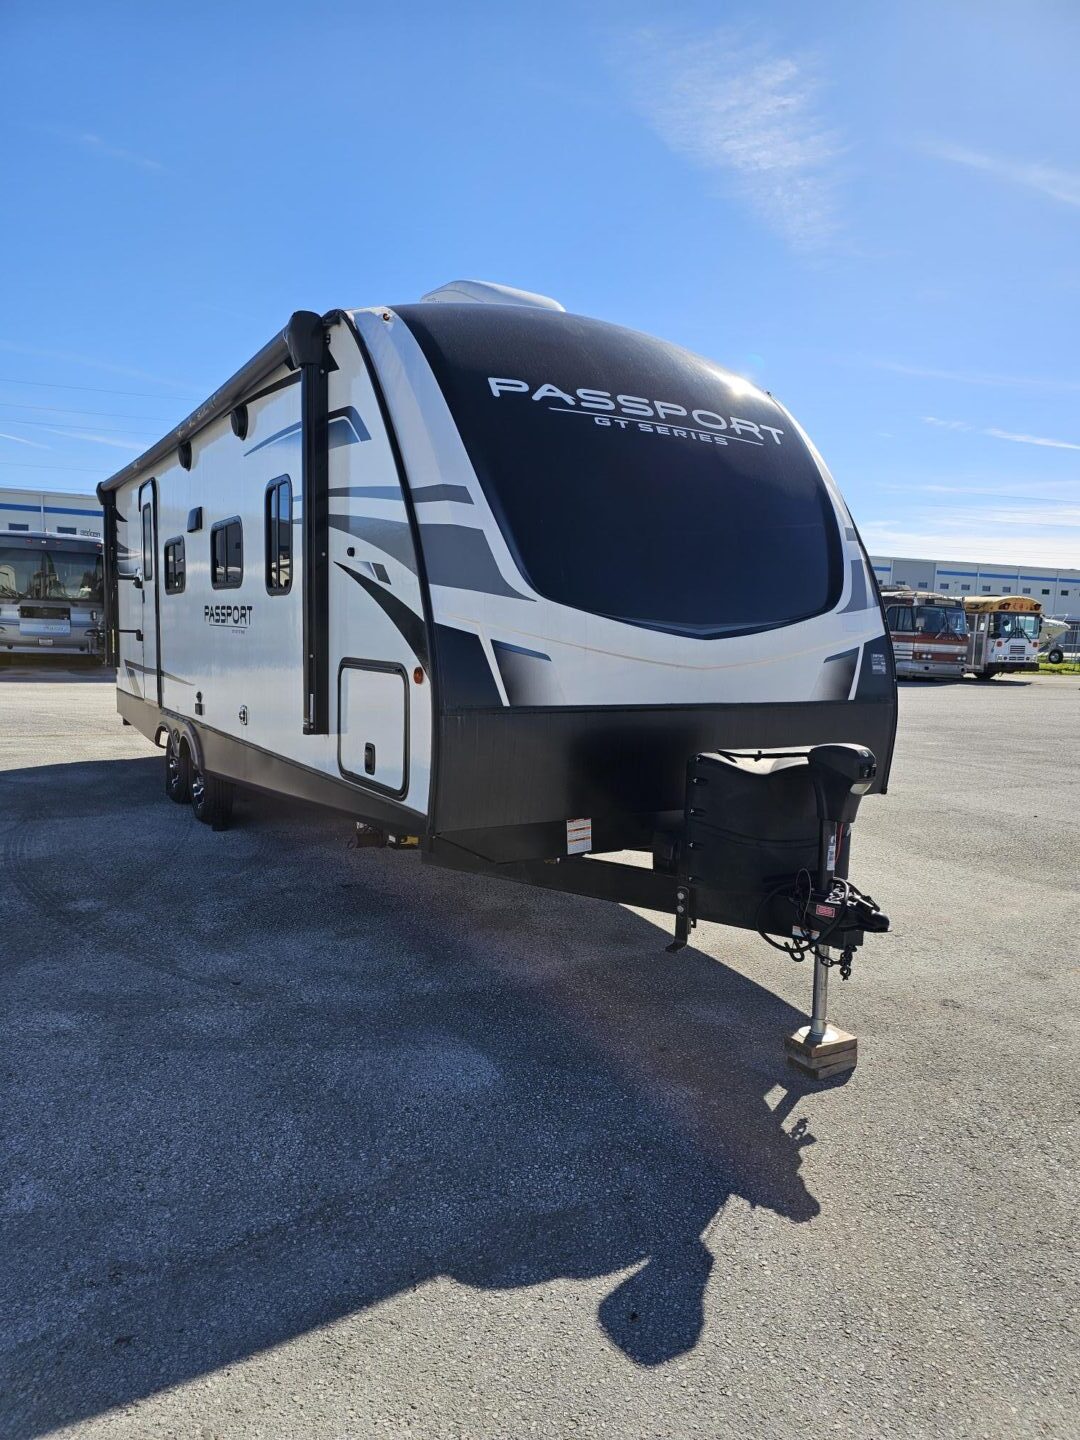 A modern passport travel trailer parked in a lot on a sunny day, featuring a sleek black and gray design with prominent branding.